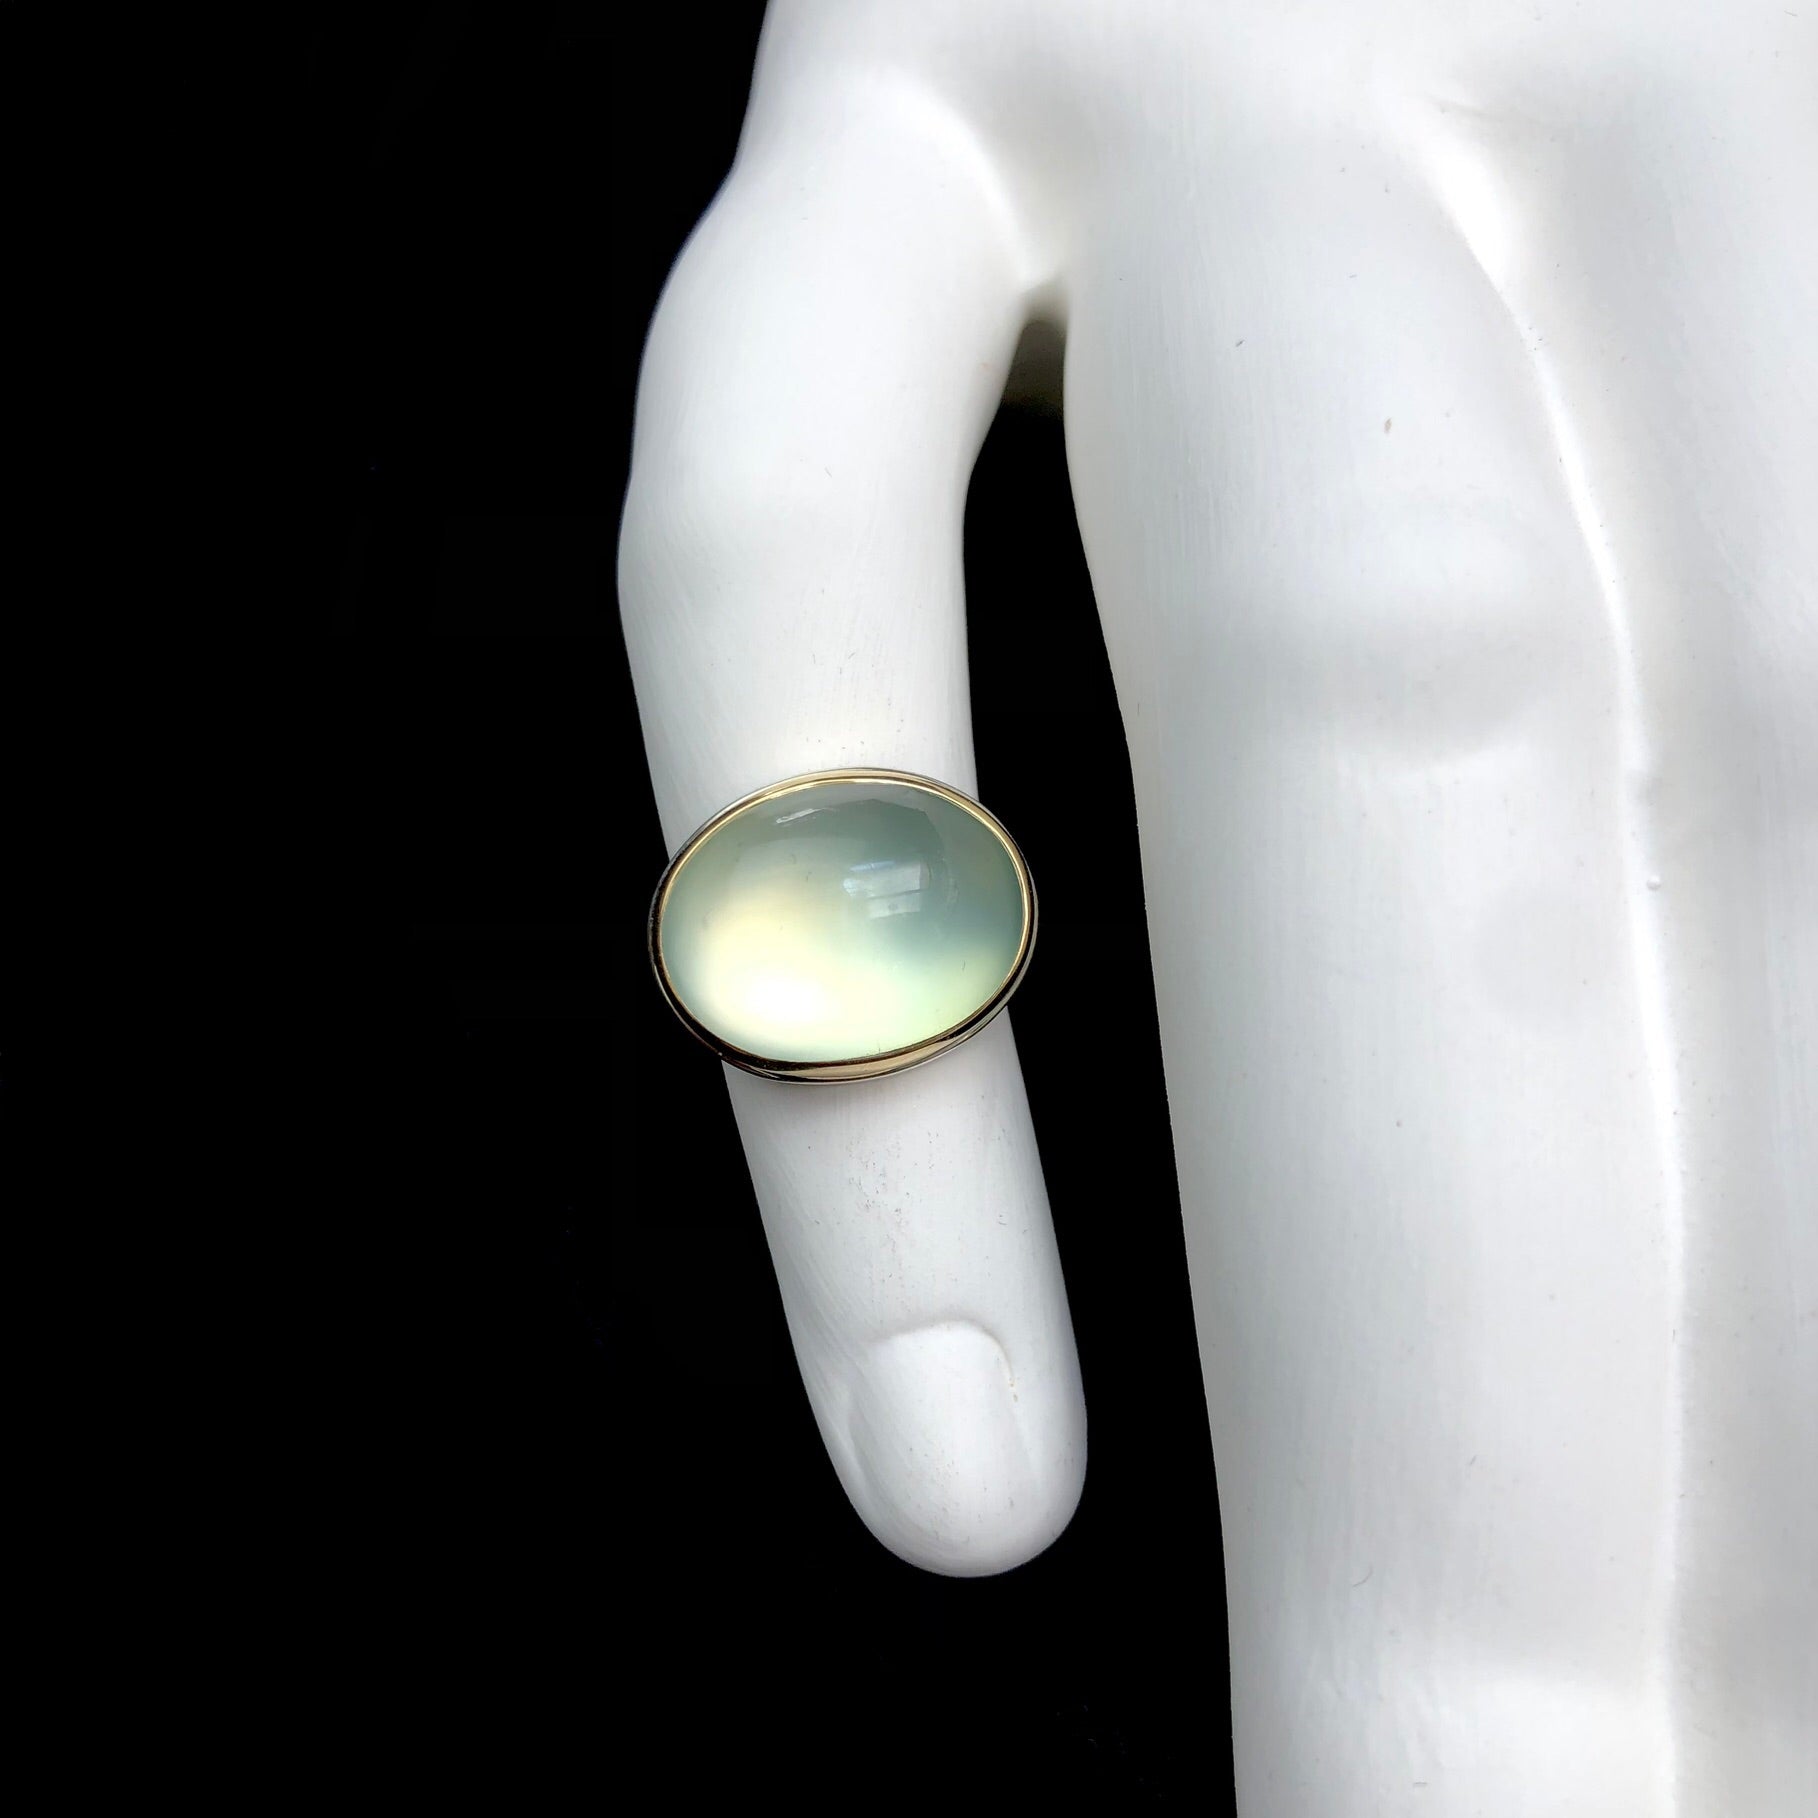 Top view of oval shaped, light green prehnite stone ring shown on white ceramic finger